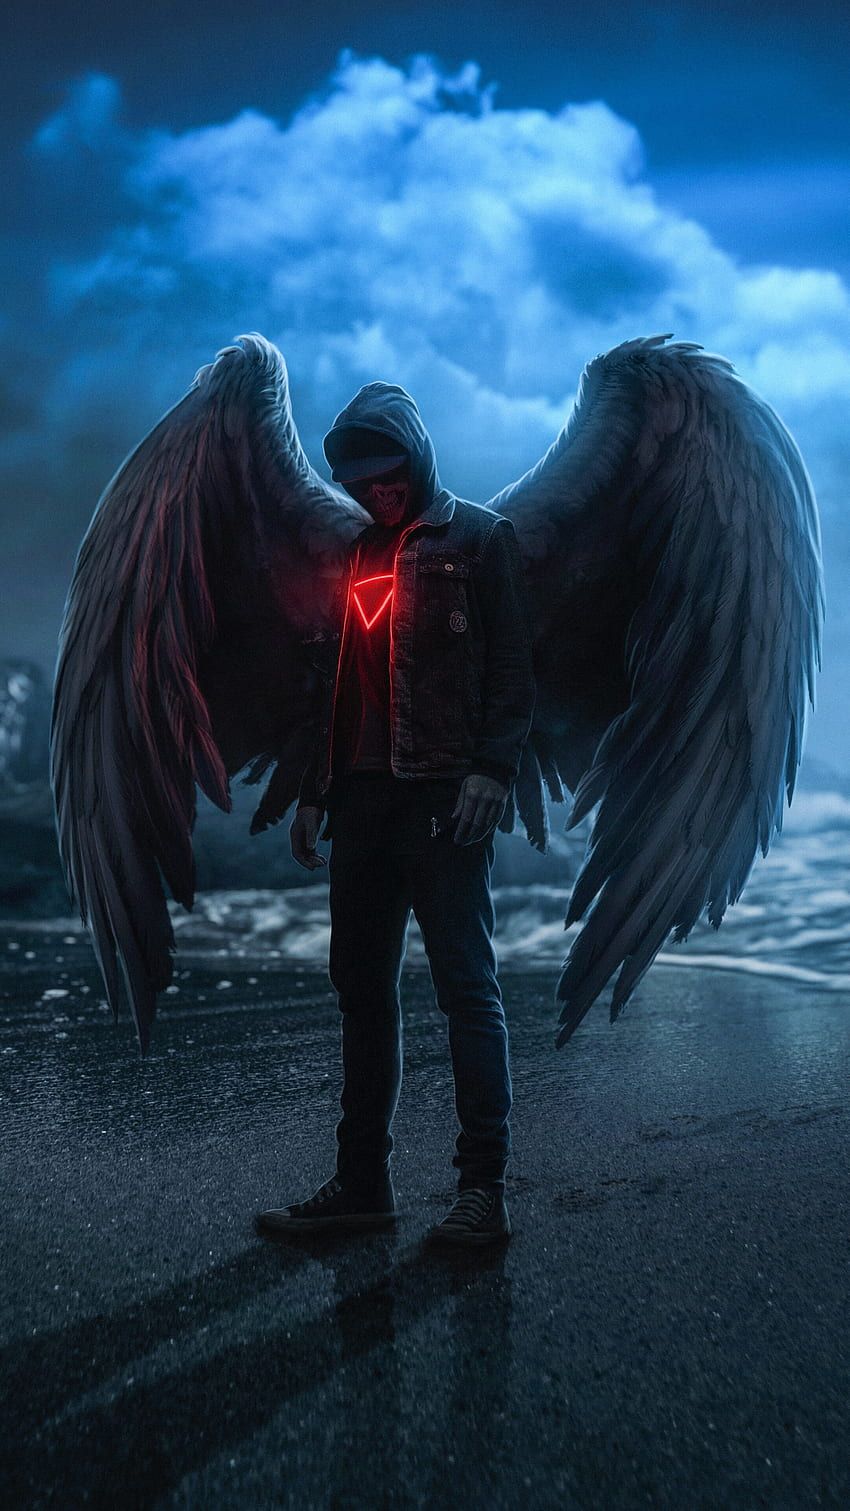 A person with wings and red eyes - Wings